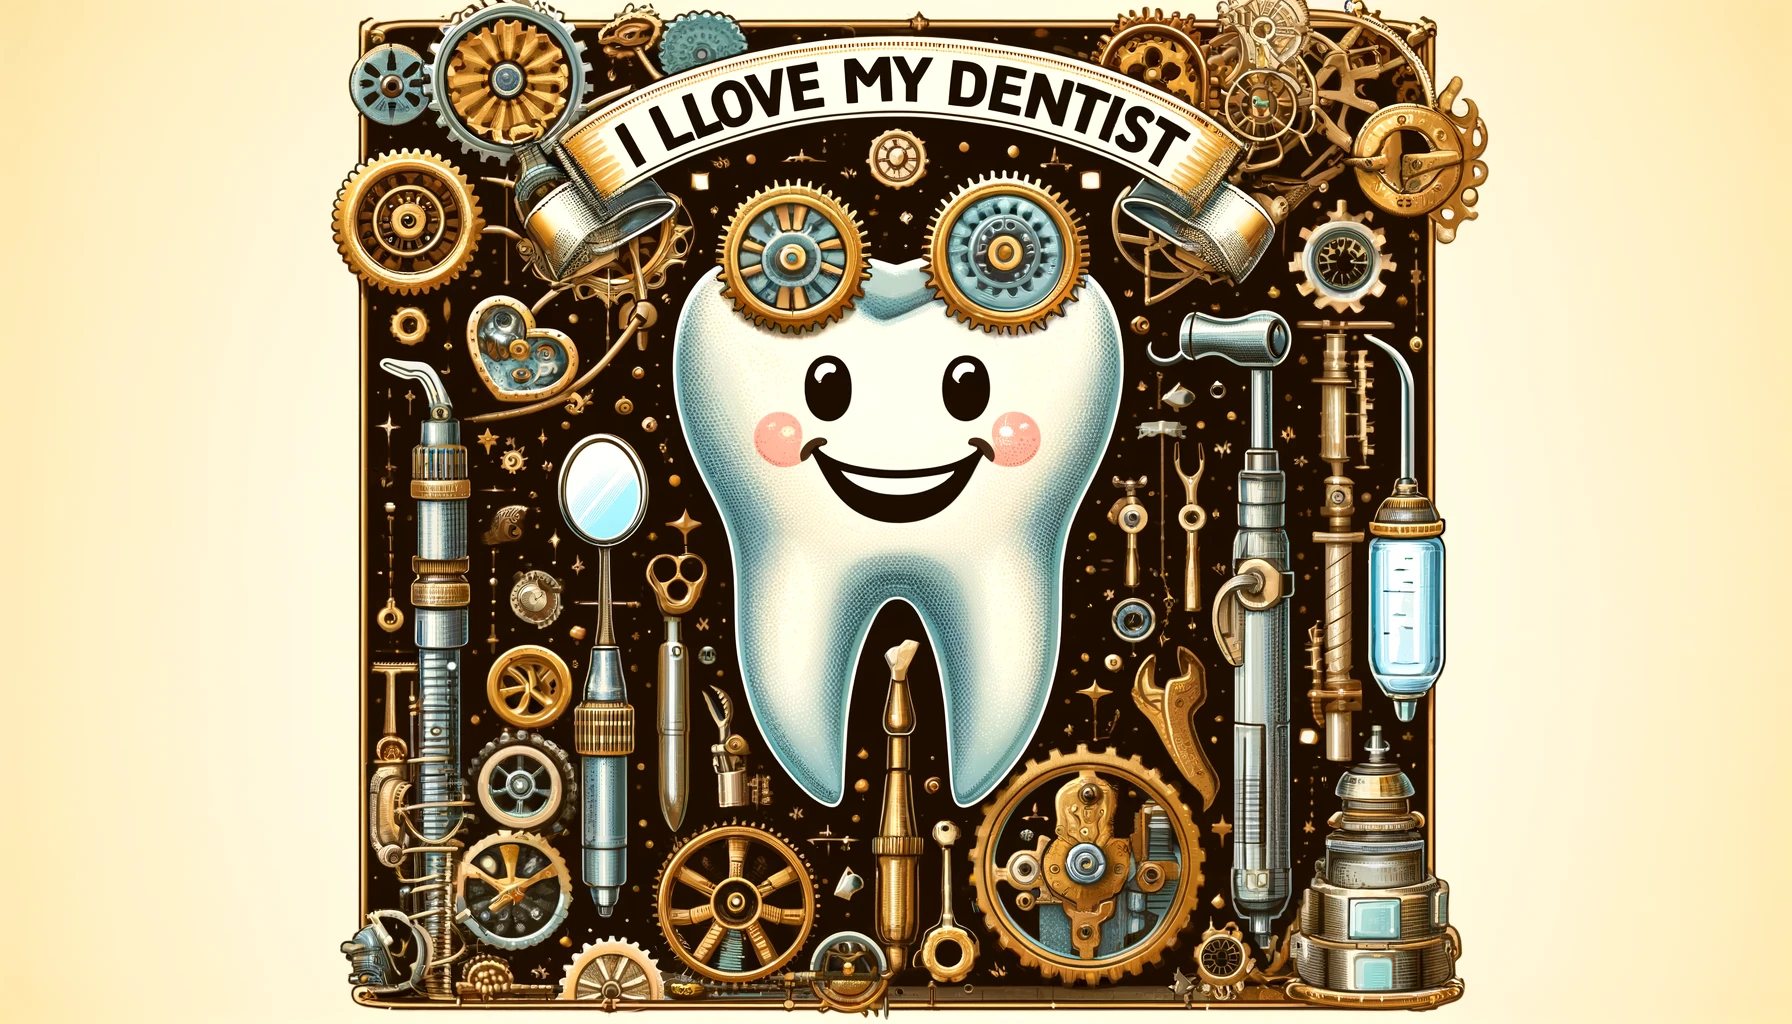 Appreciative Greetings for National I Love My Dentist Day